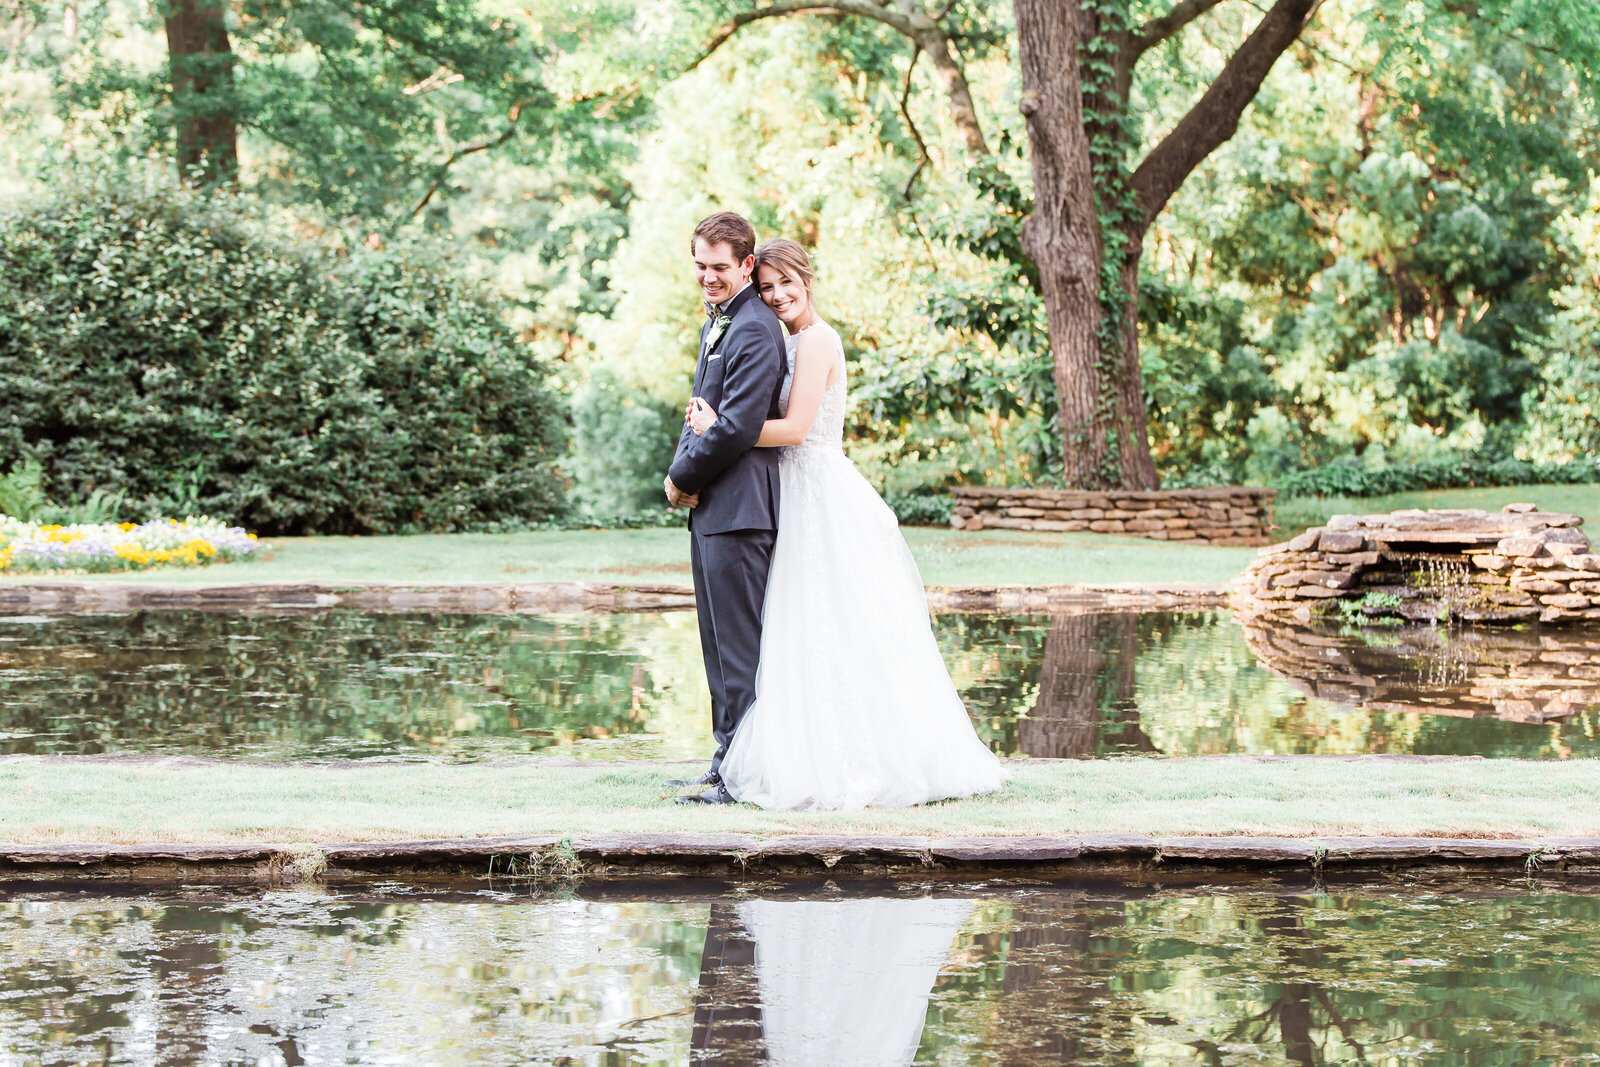 Bride and Groom portrait at reflection pond